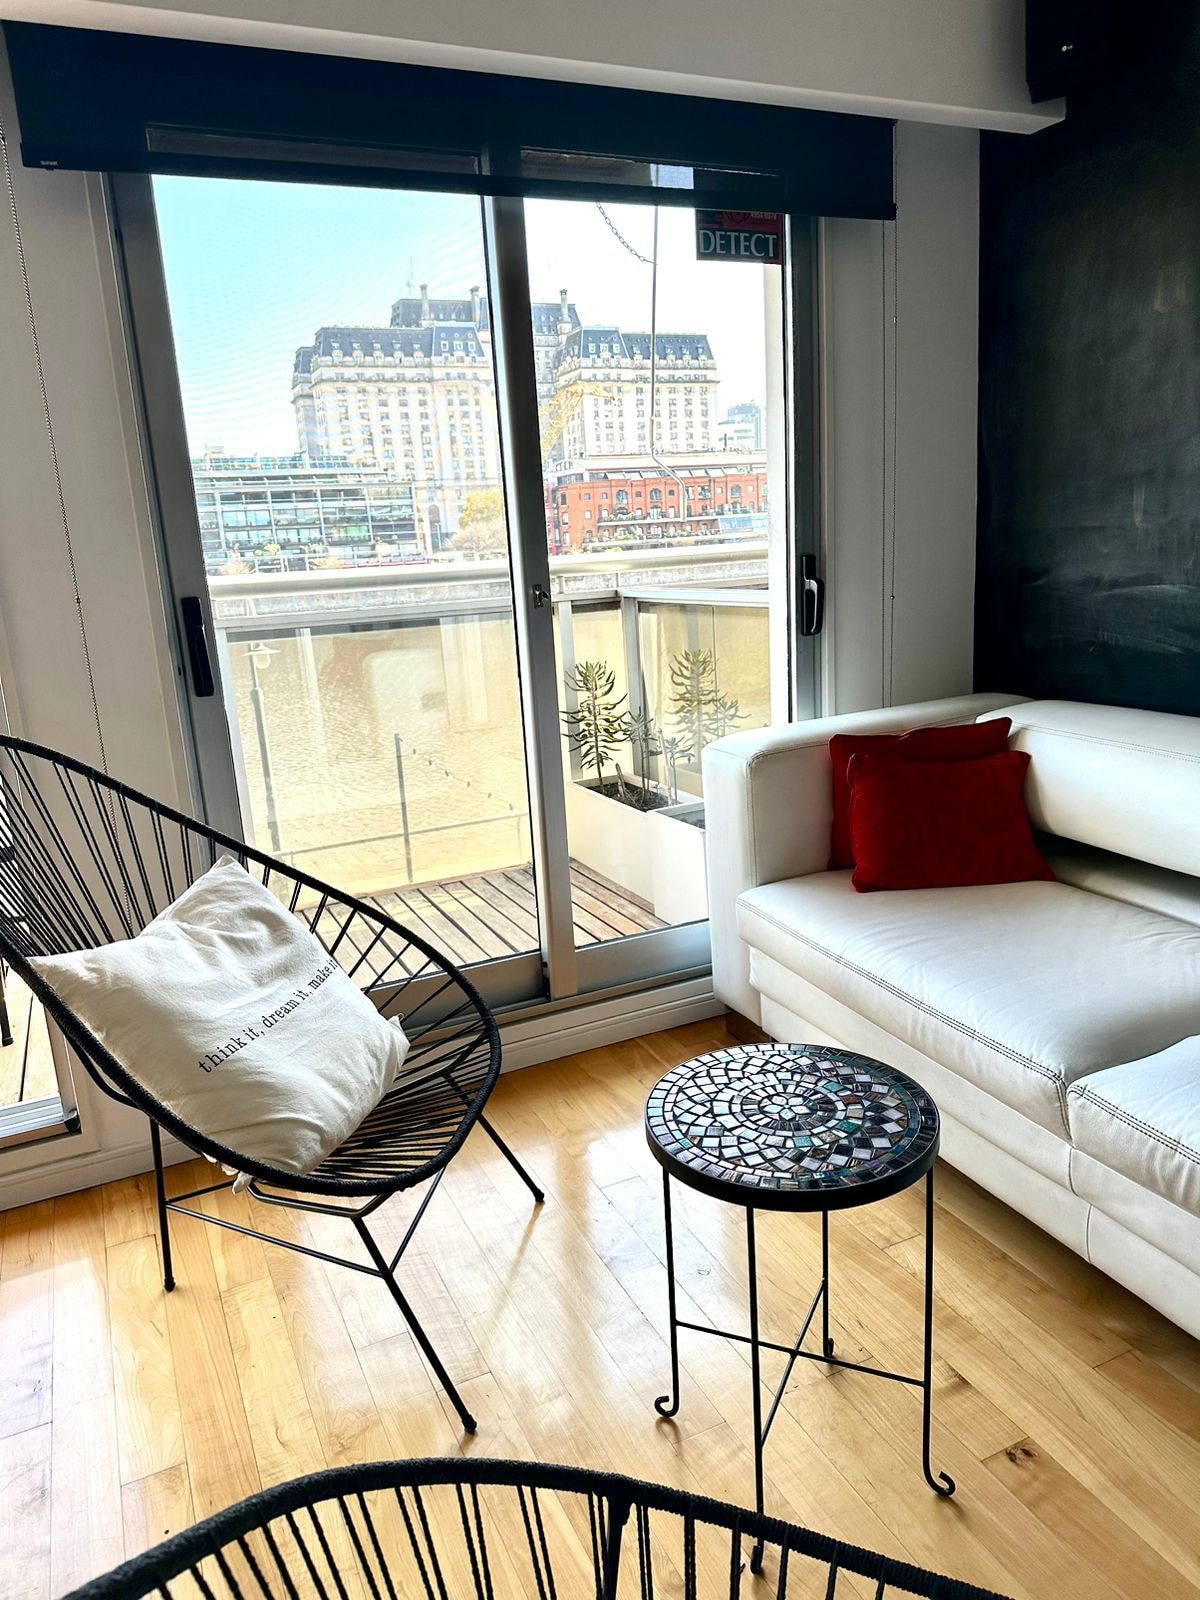 Exclusive apartment on the dock in Puerto Madero